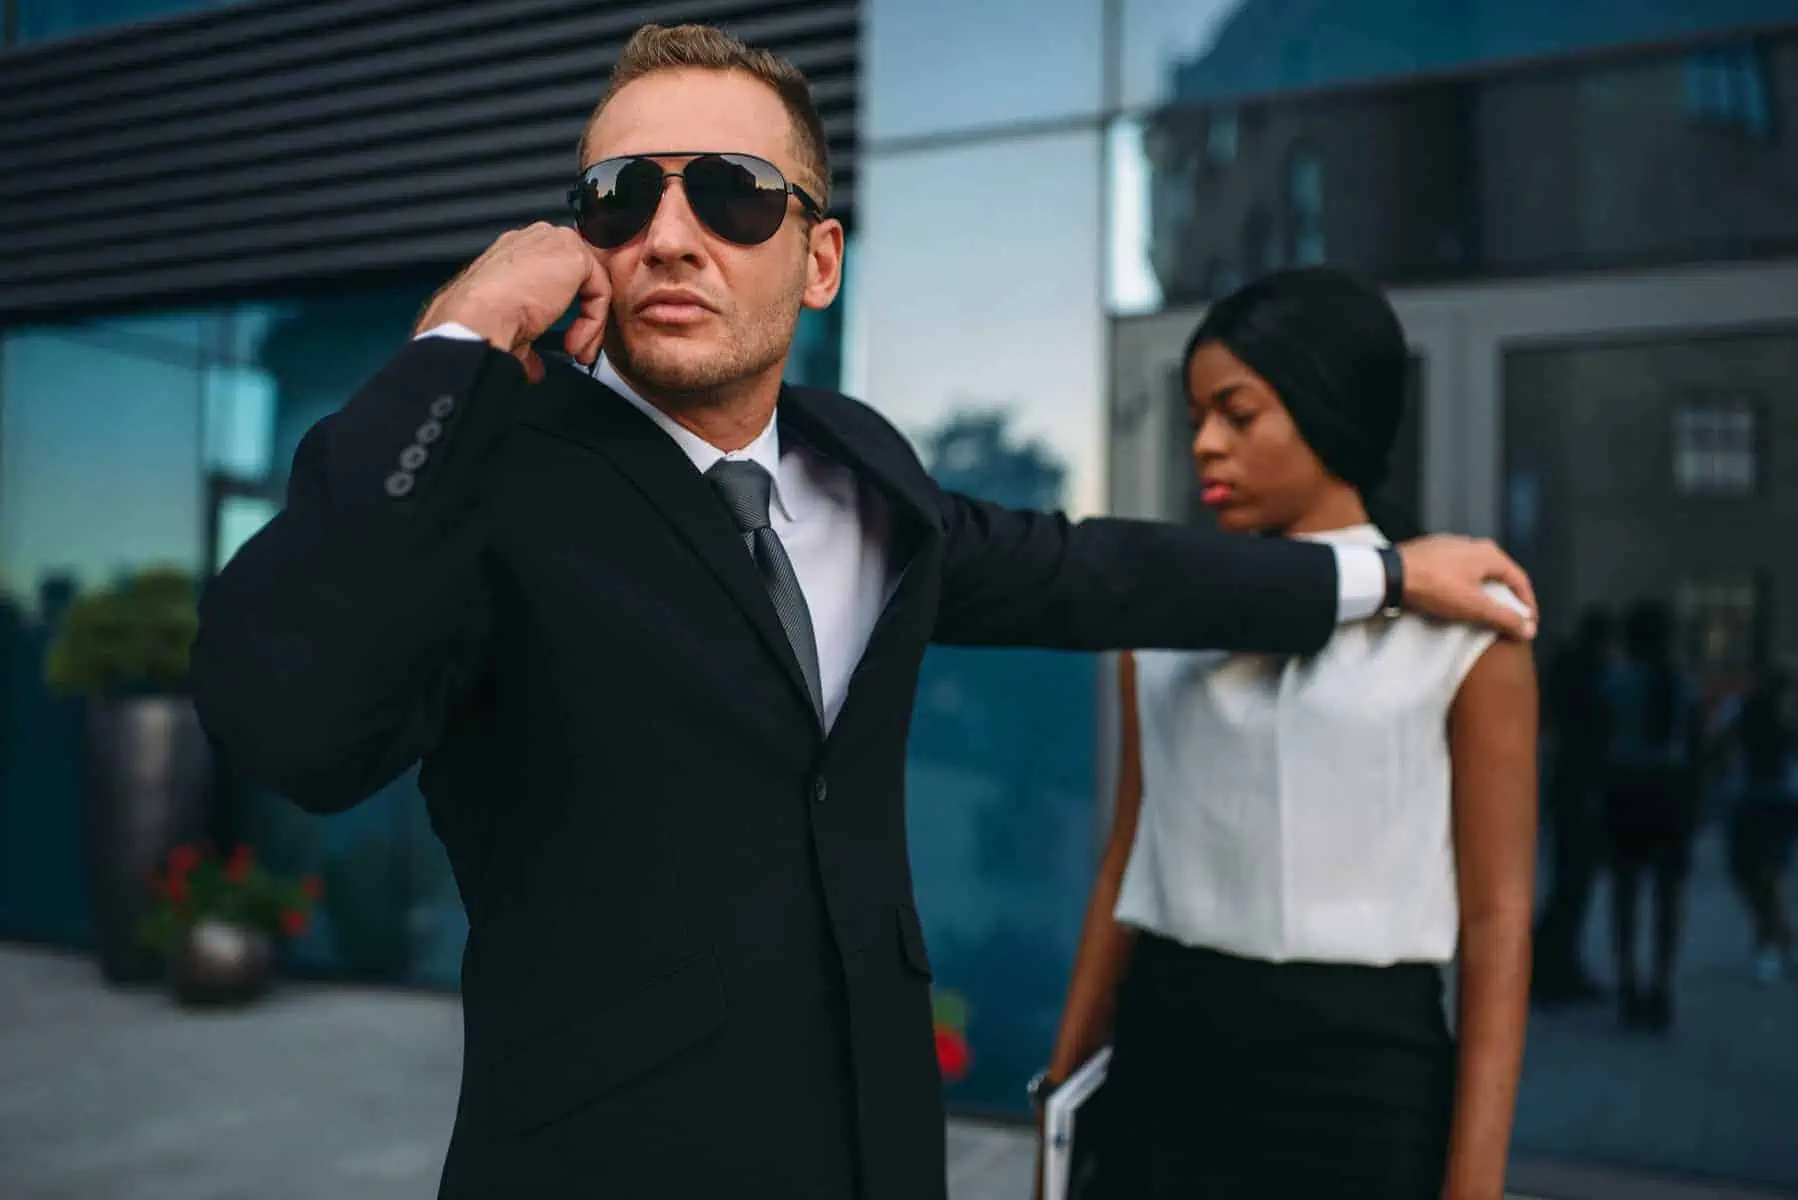 A man in a suit and sunglasses talking on a cell phone